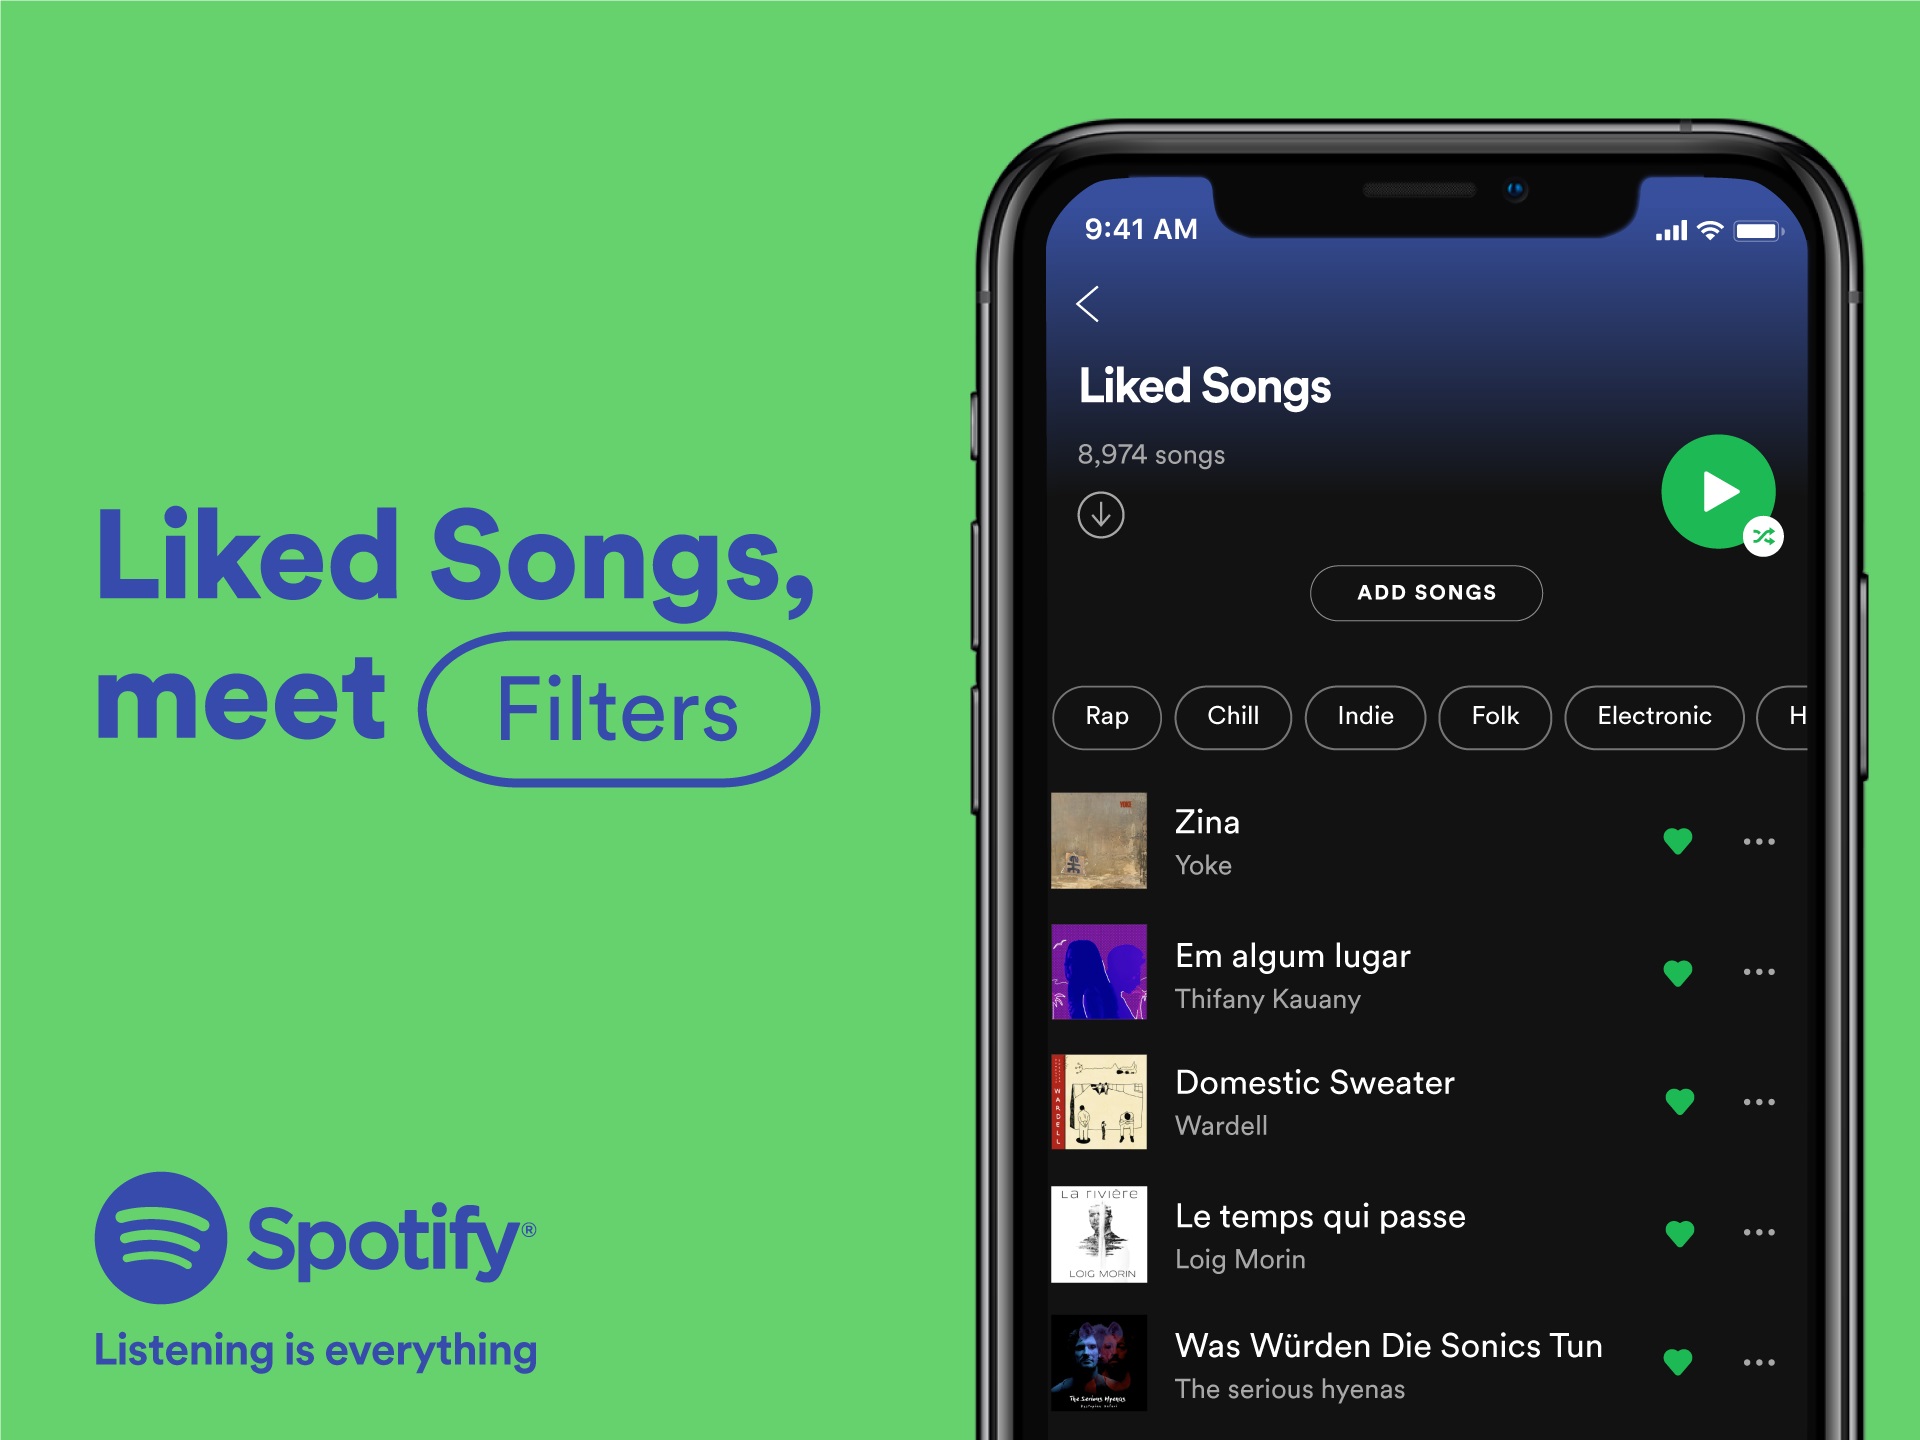 organize your music spotify